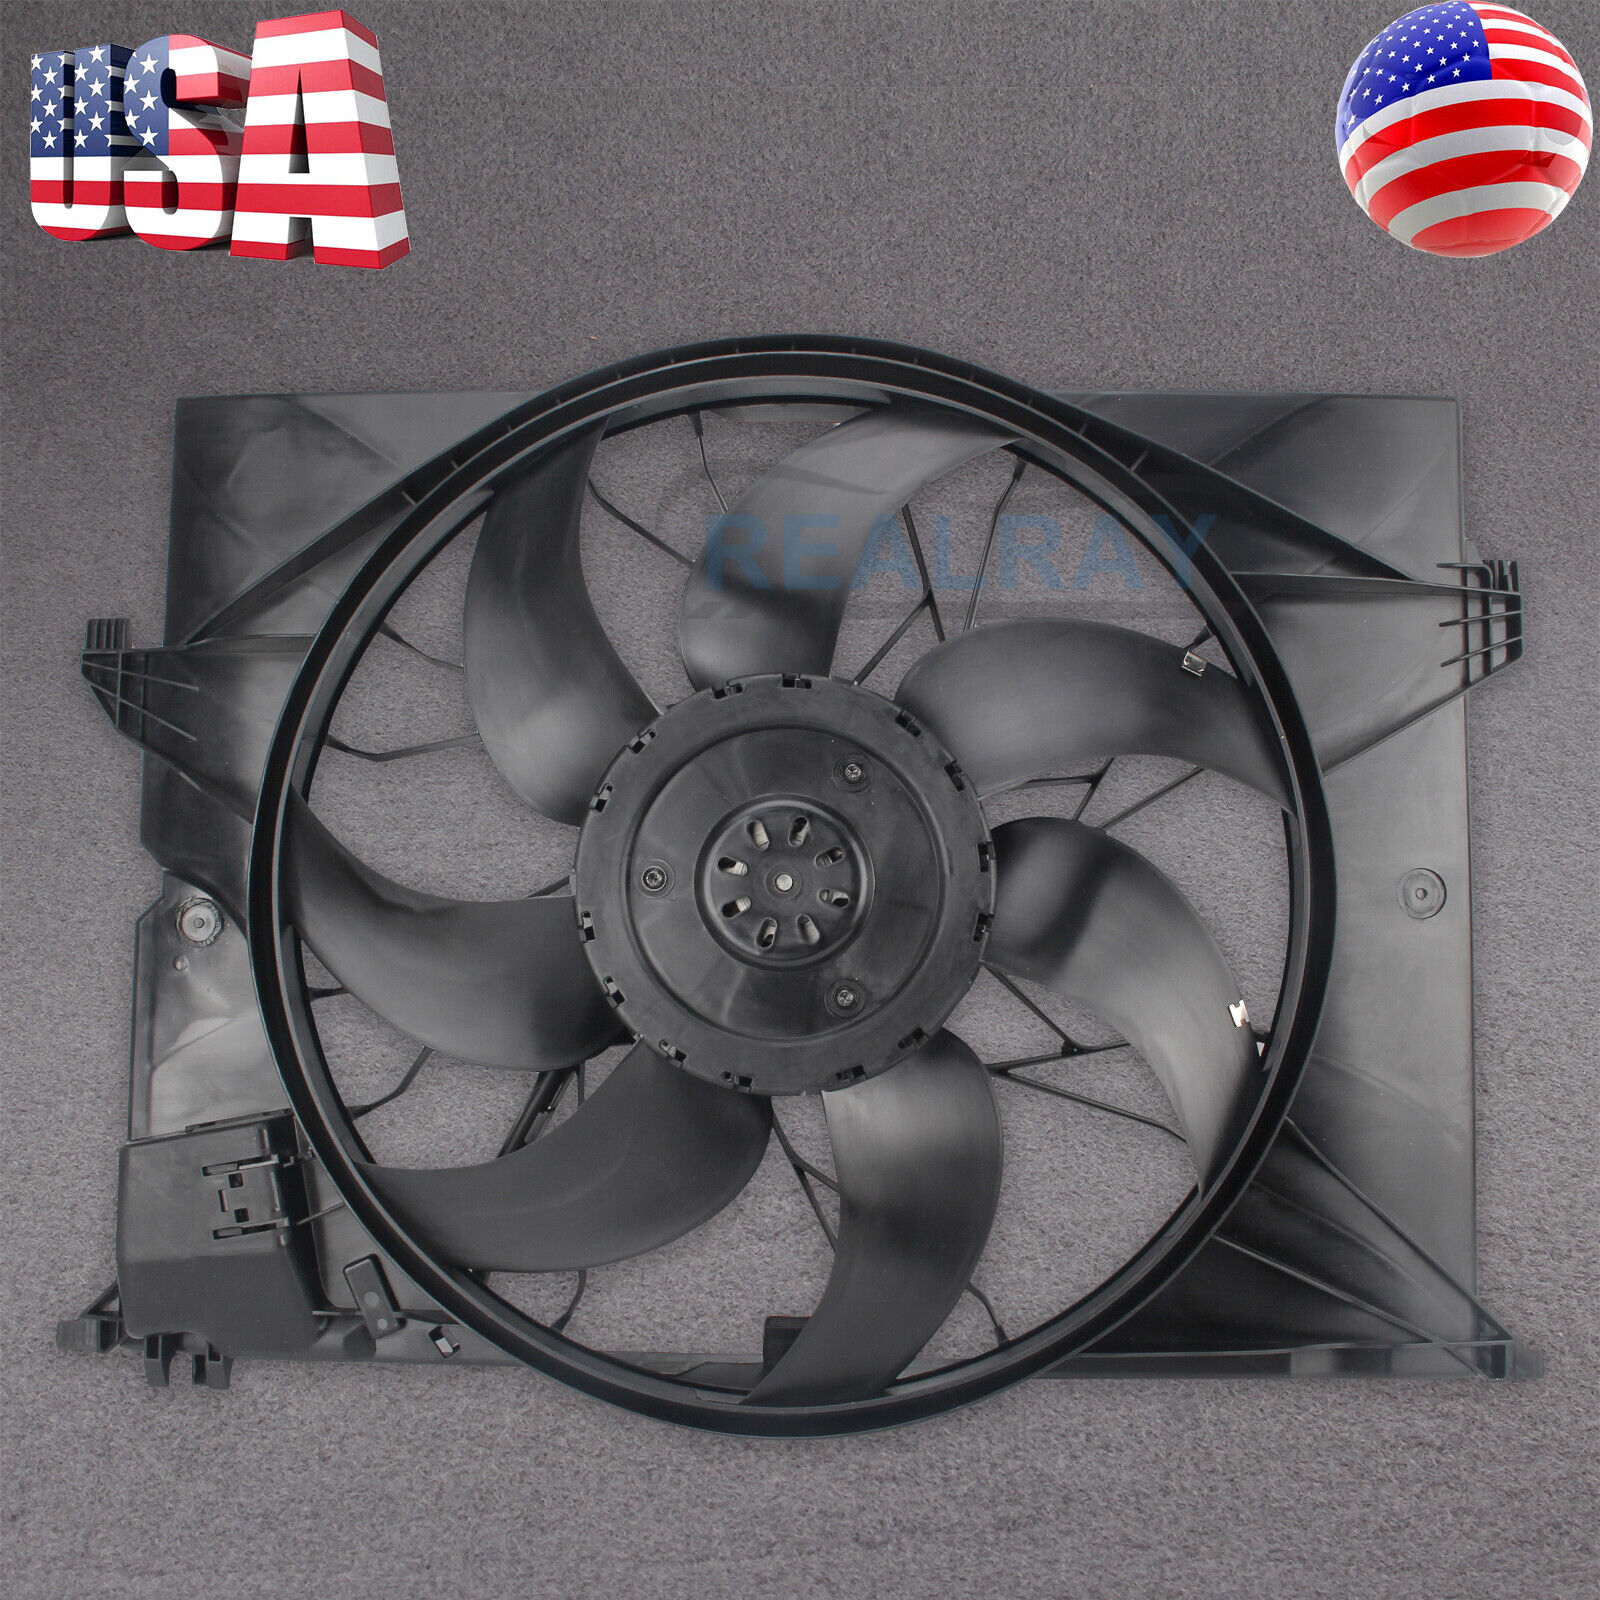 Radiator Cooling Fan For Mercedes Benz W221 S350 S430 S450 S550 CL500 S600 06-13